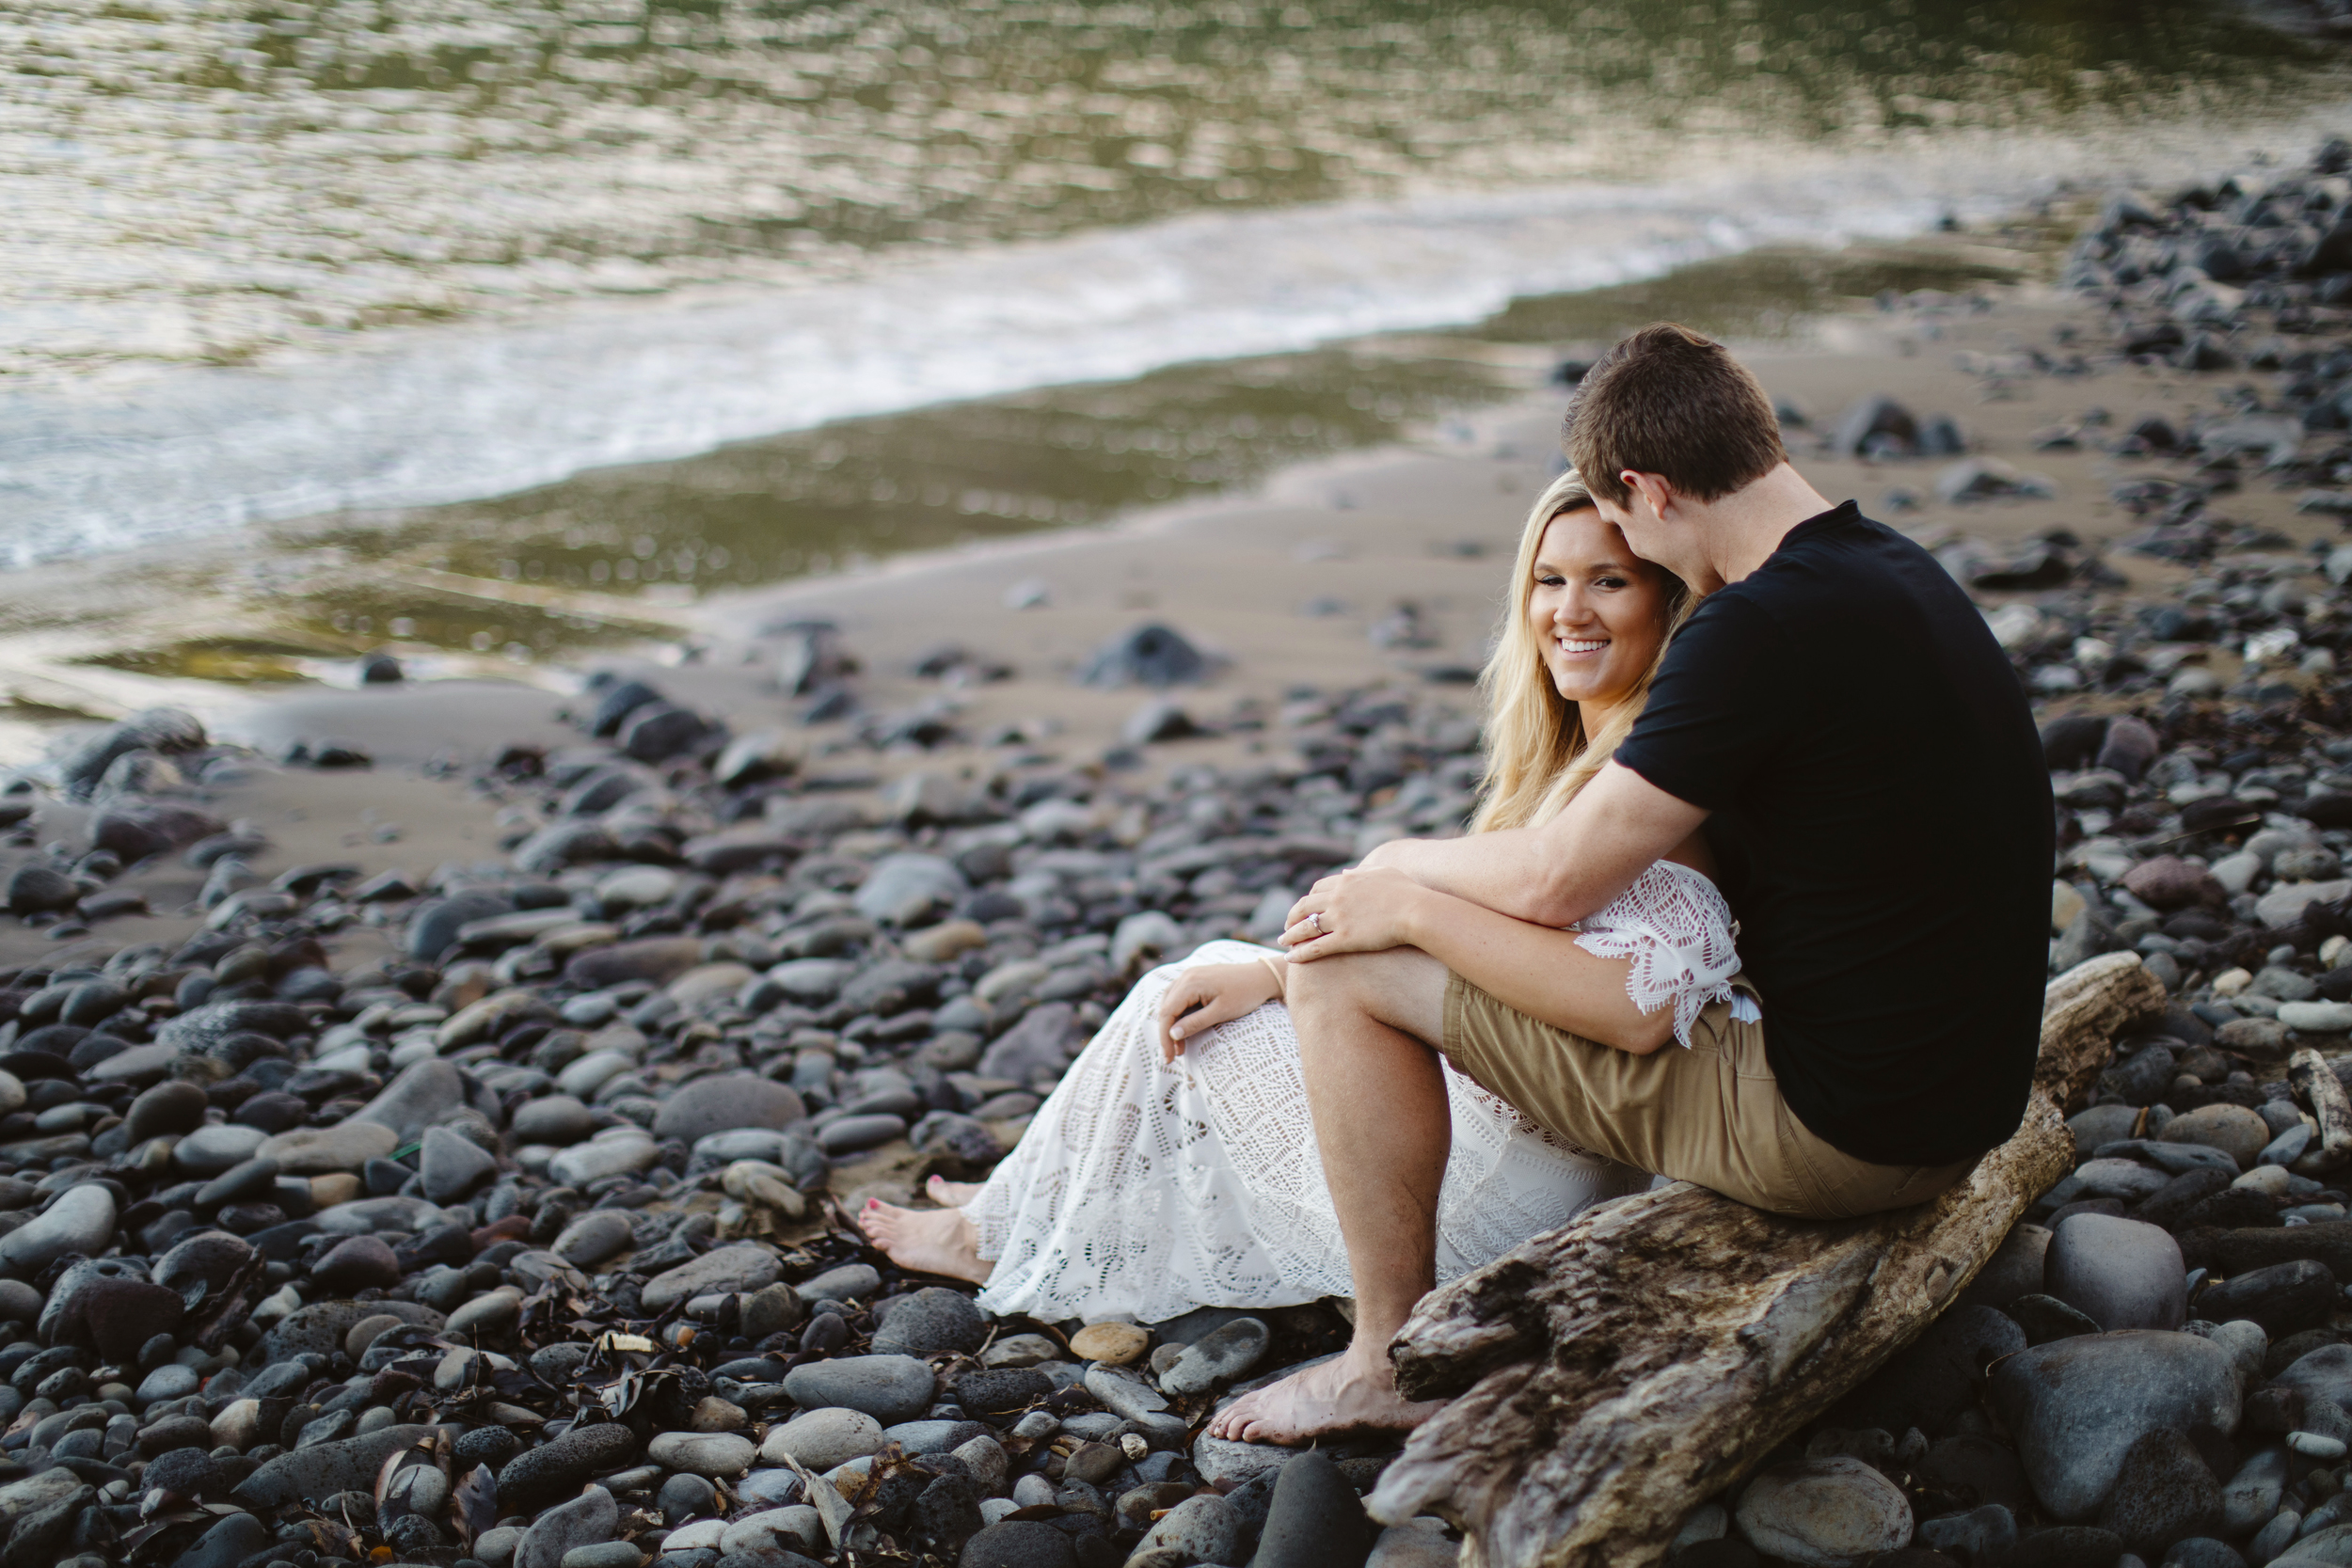 A Maui adventure engagement photography session by Hawaii Elopement Photographer Colby and Jess